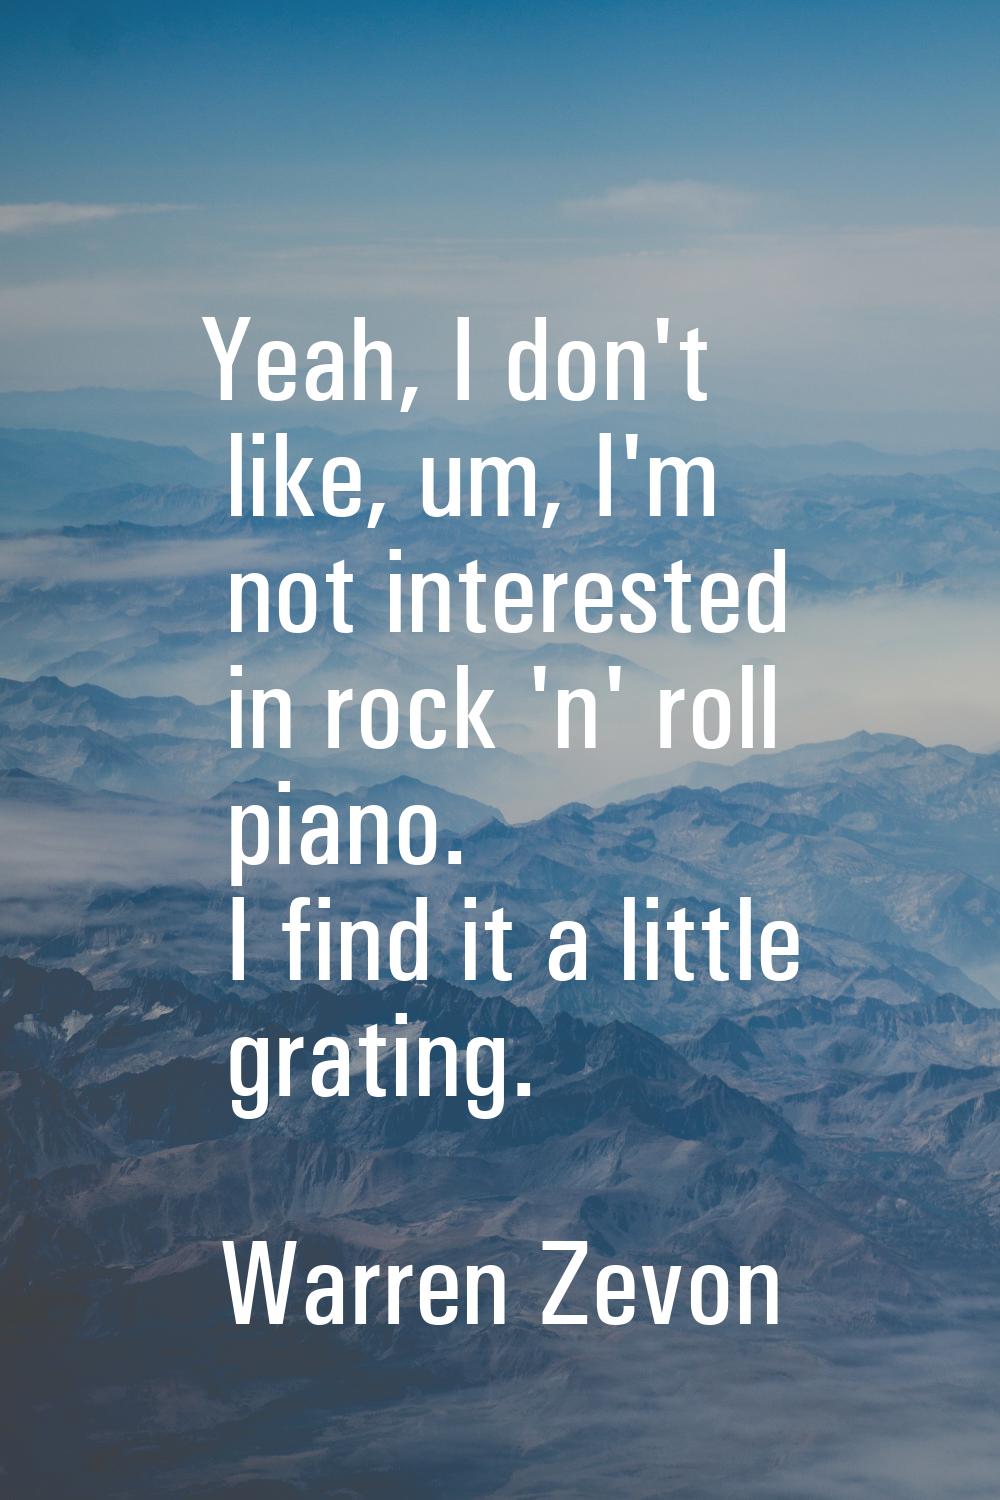 Yeah, I don't like, um, I'm not interested in rock 'n' roll piano. I find it a little grating.